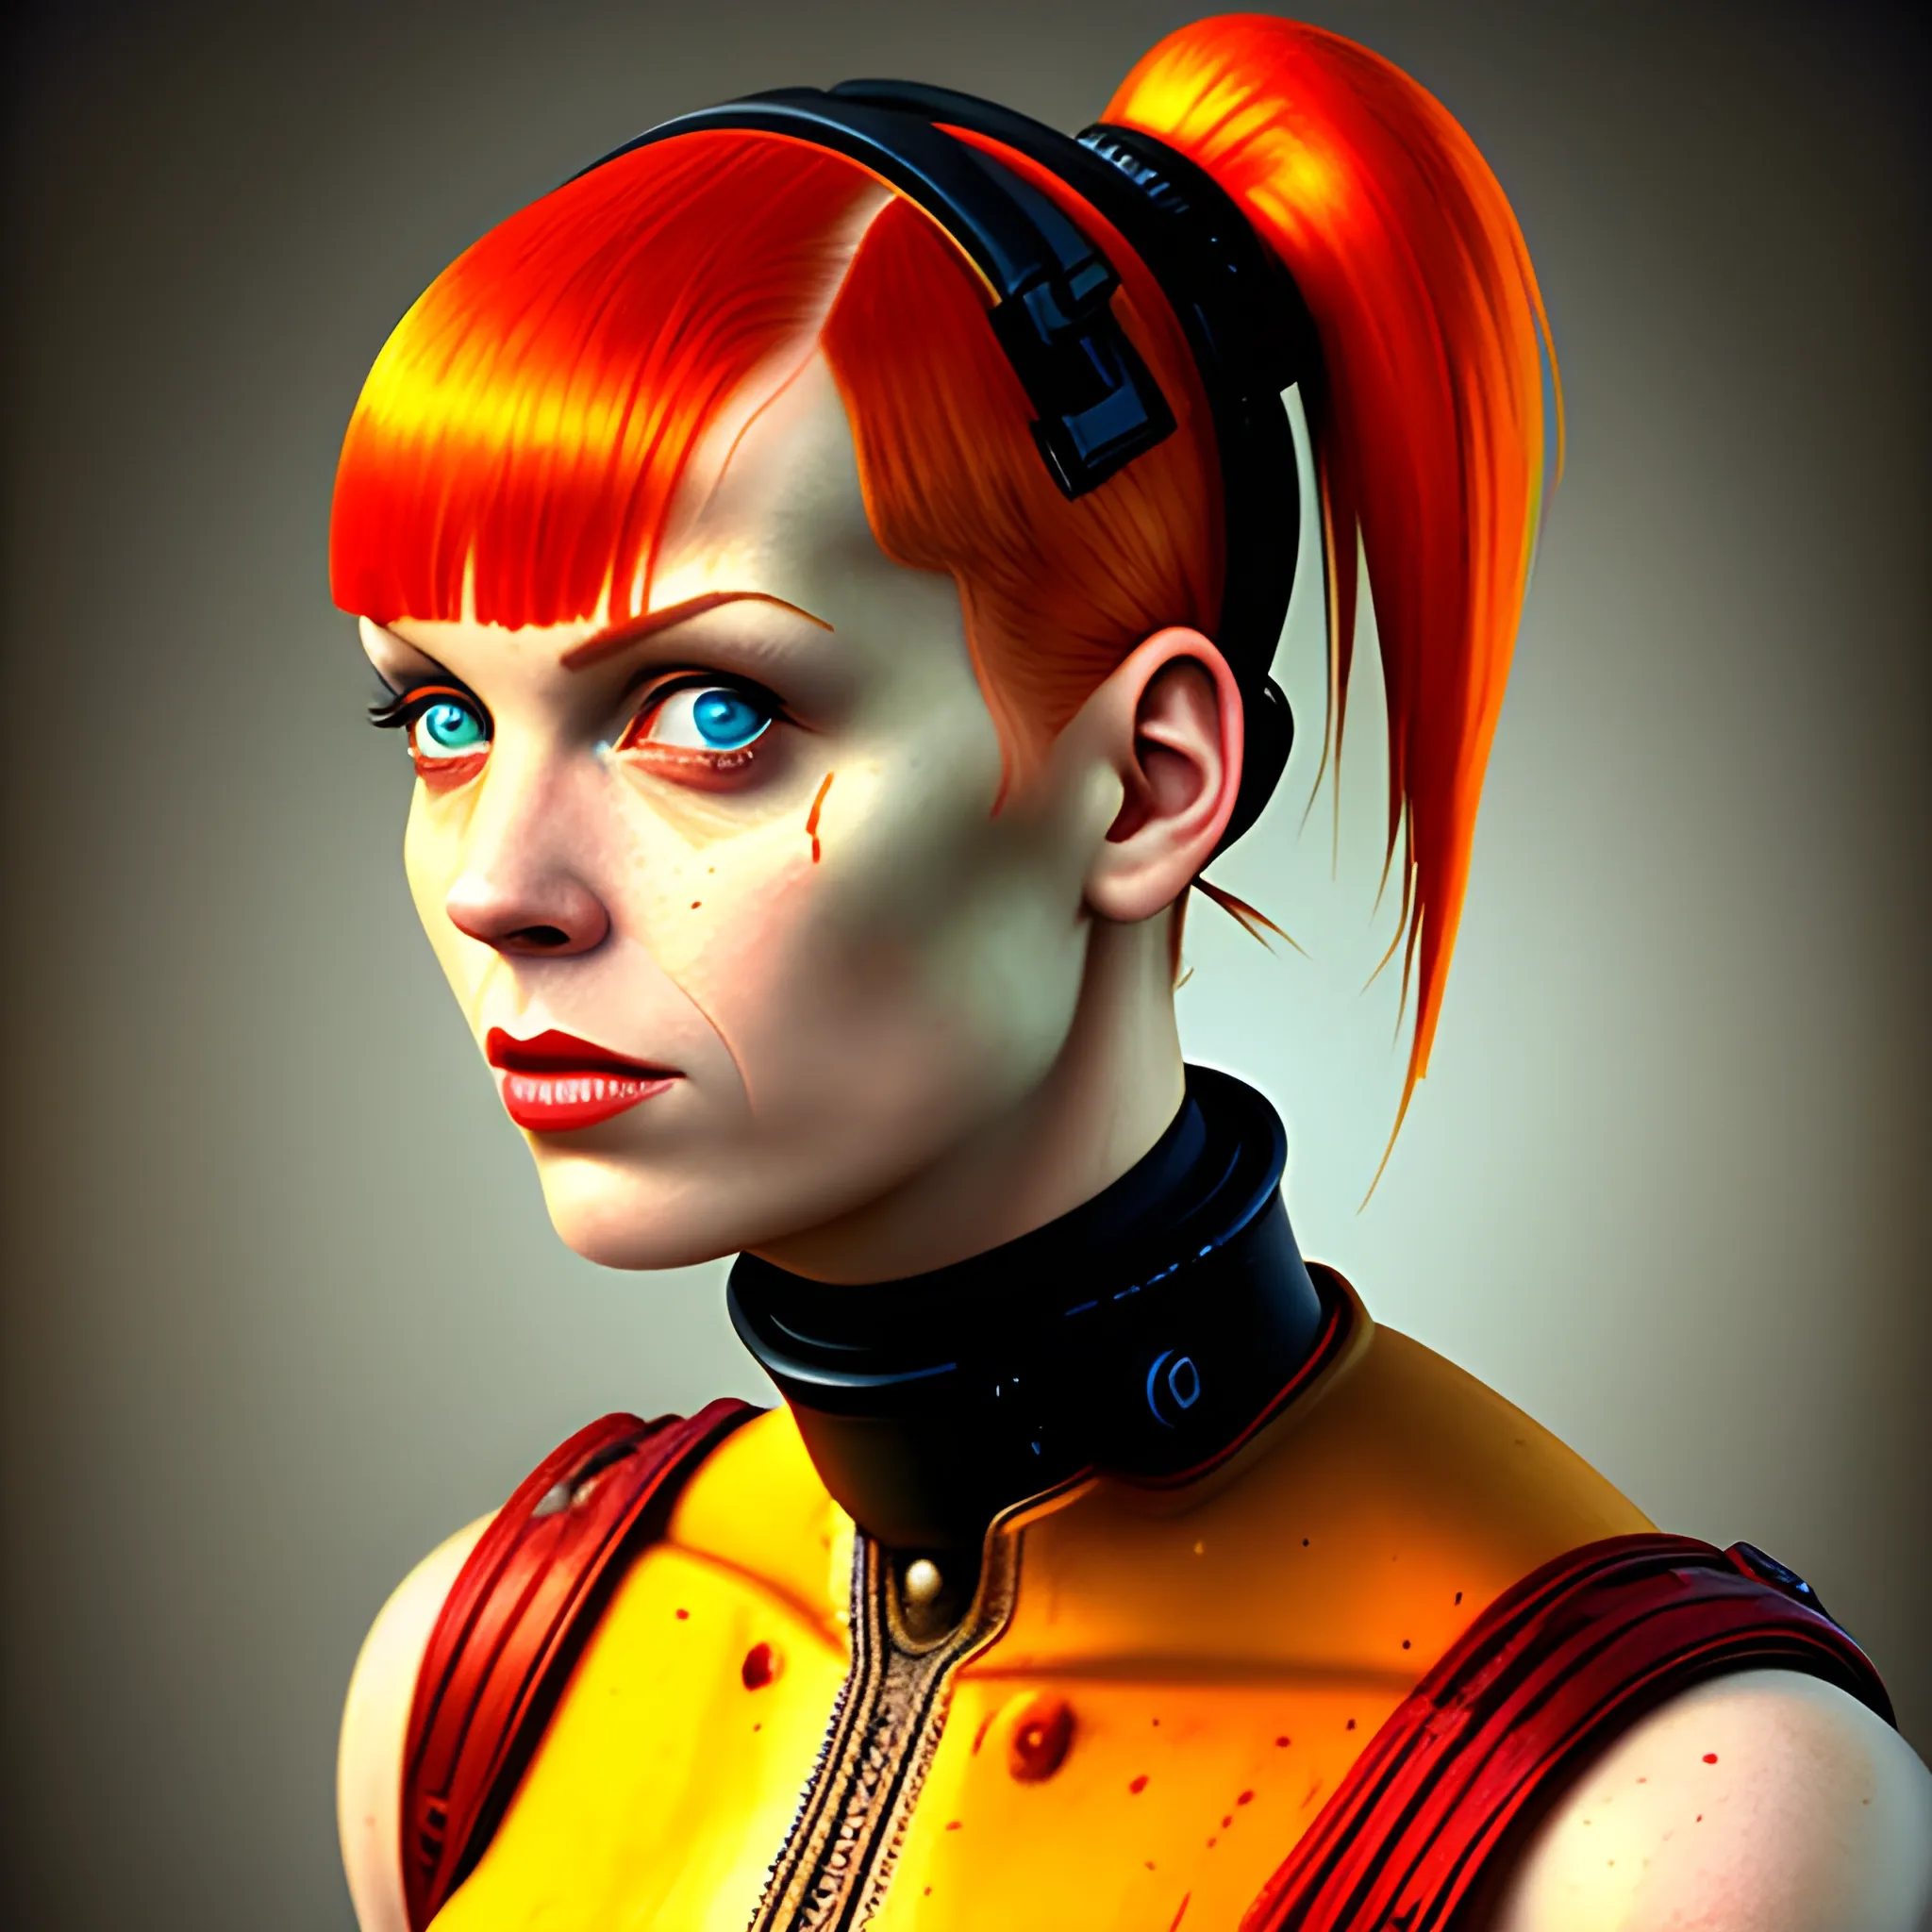 In the style of Fallout 1, (masterpiece), (portrait photography), (portrait of an adult Caucasian female), Leeloo from the 5th Element